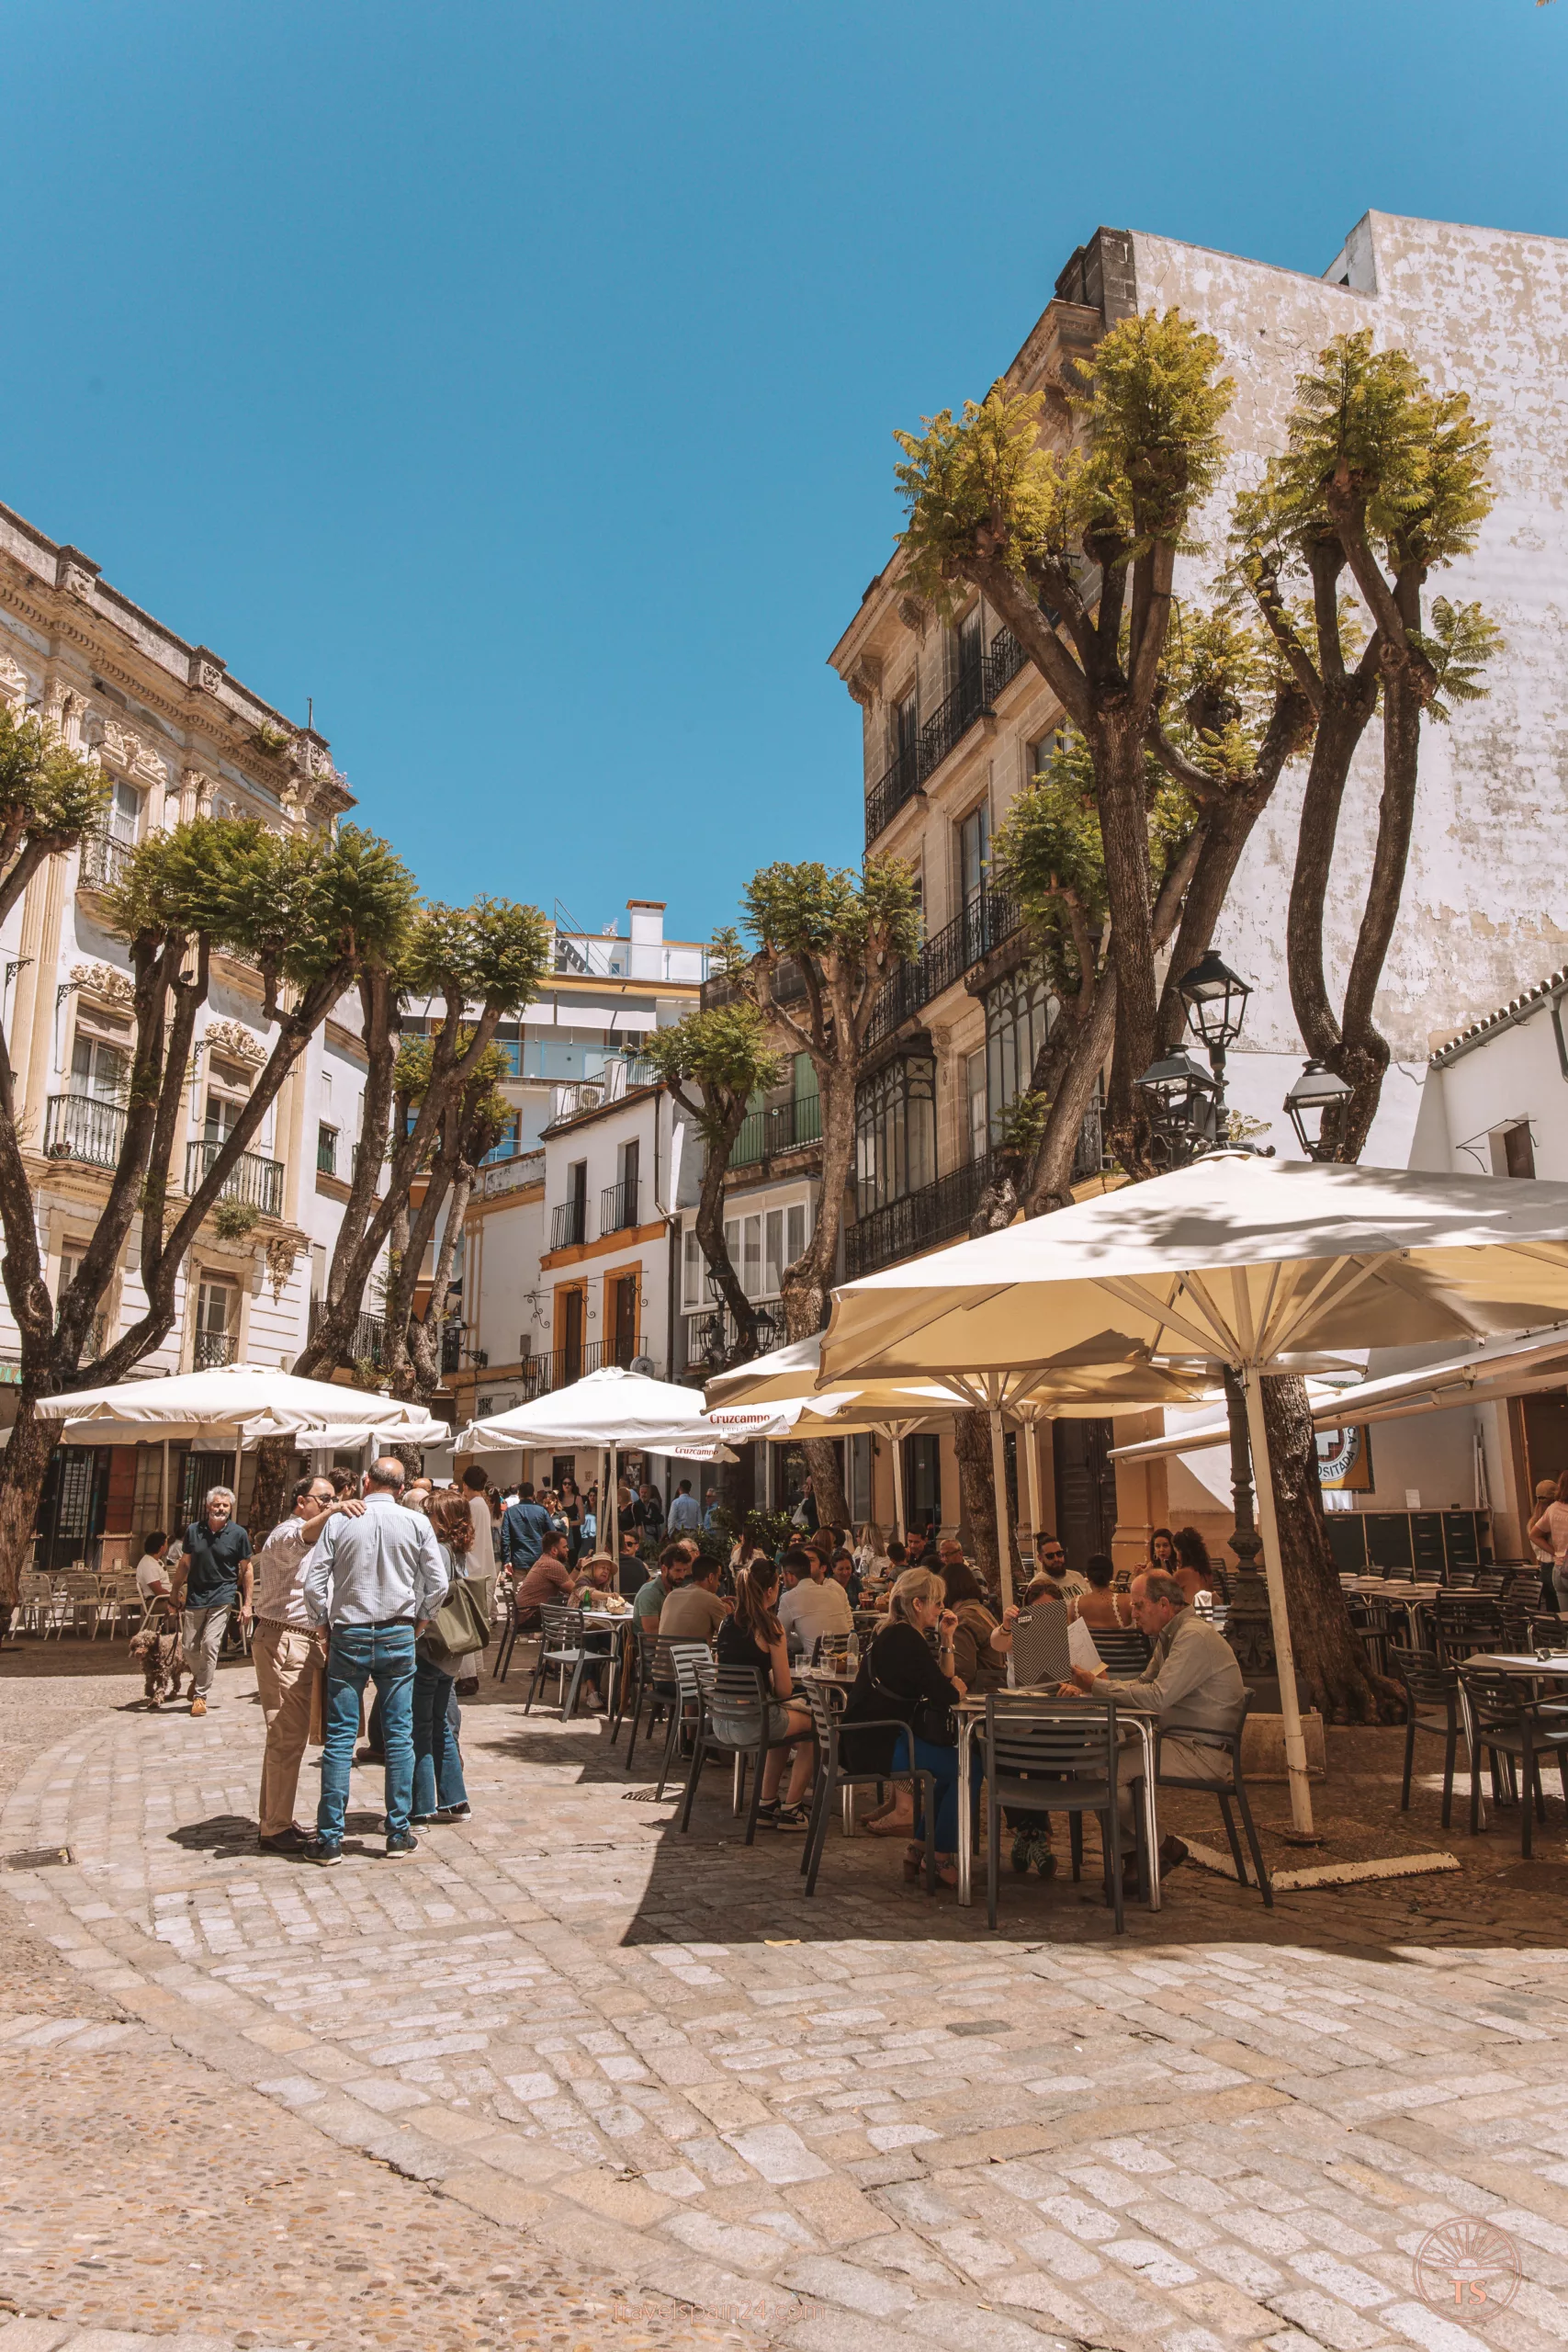 Plaza de la Yerba in Jerez de la Frontera, with people seated at terrace tables enjoying meals and drinks. This image relates to the post by illustrating a lively social spot in Jerez de la Frontera.